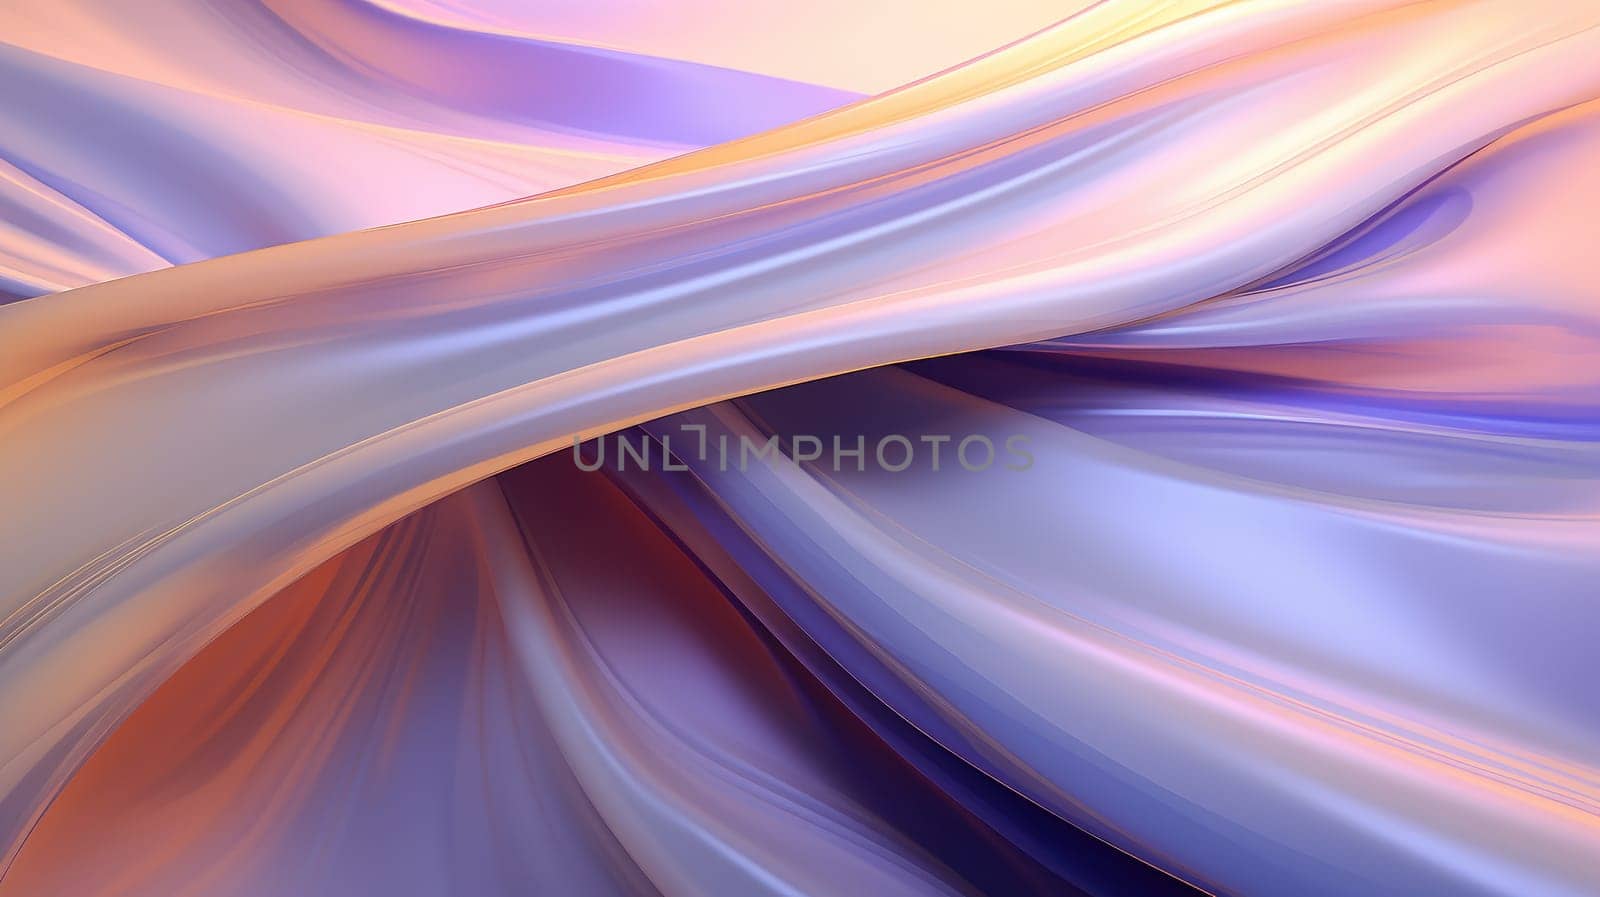 Beautiful background. Soft lines of fabric by cherezoff